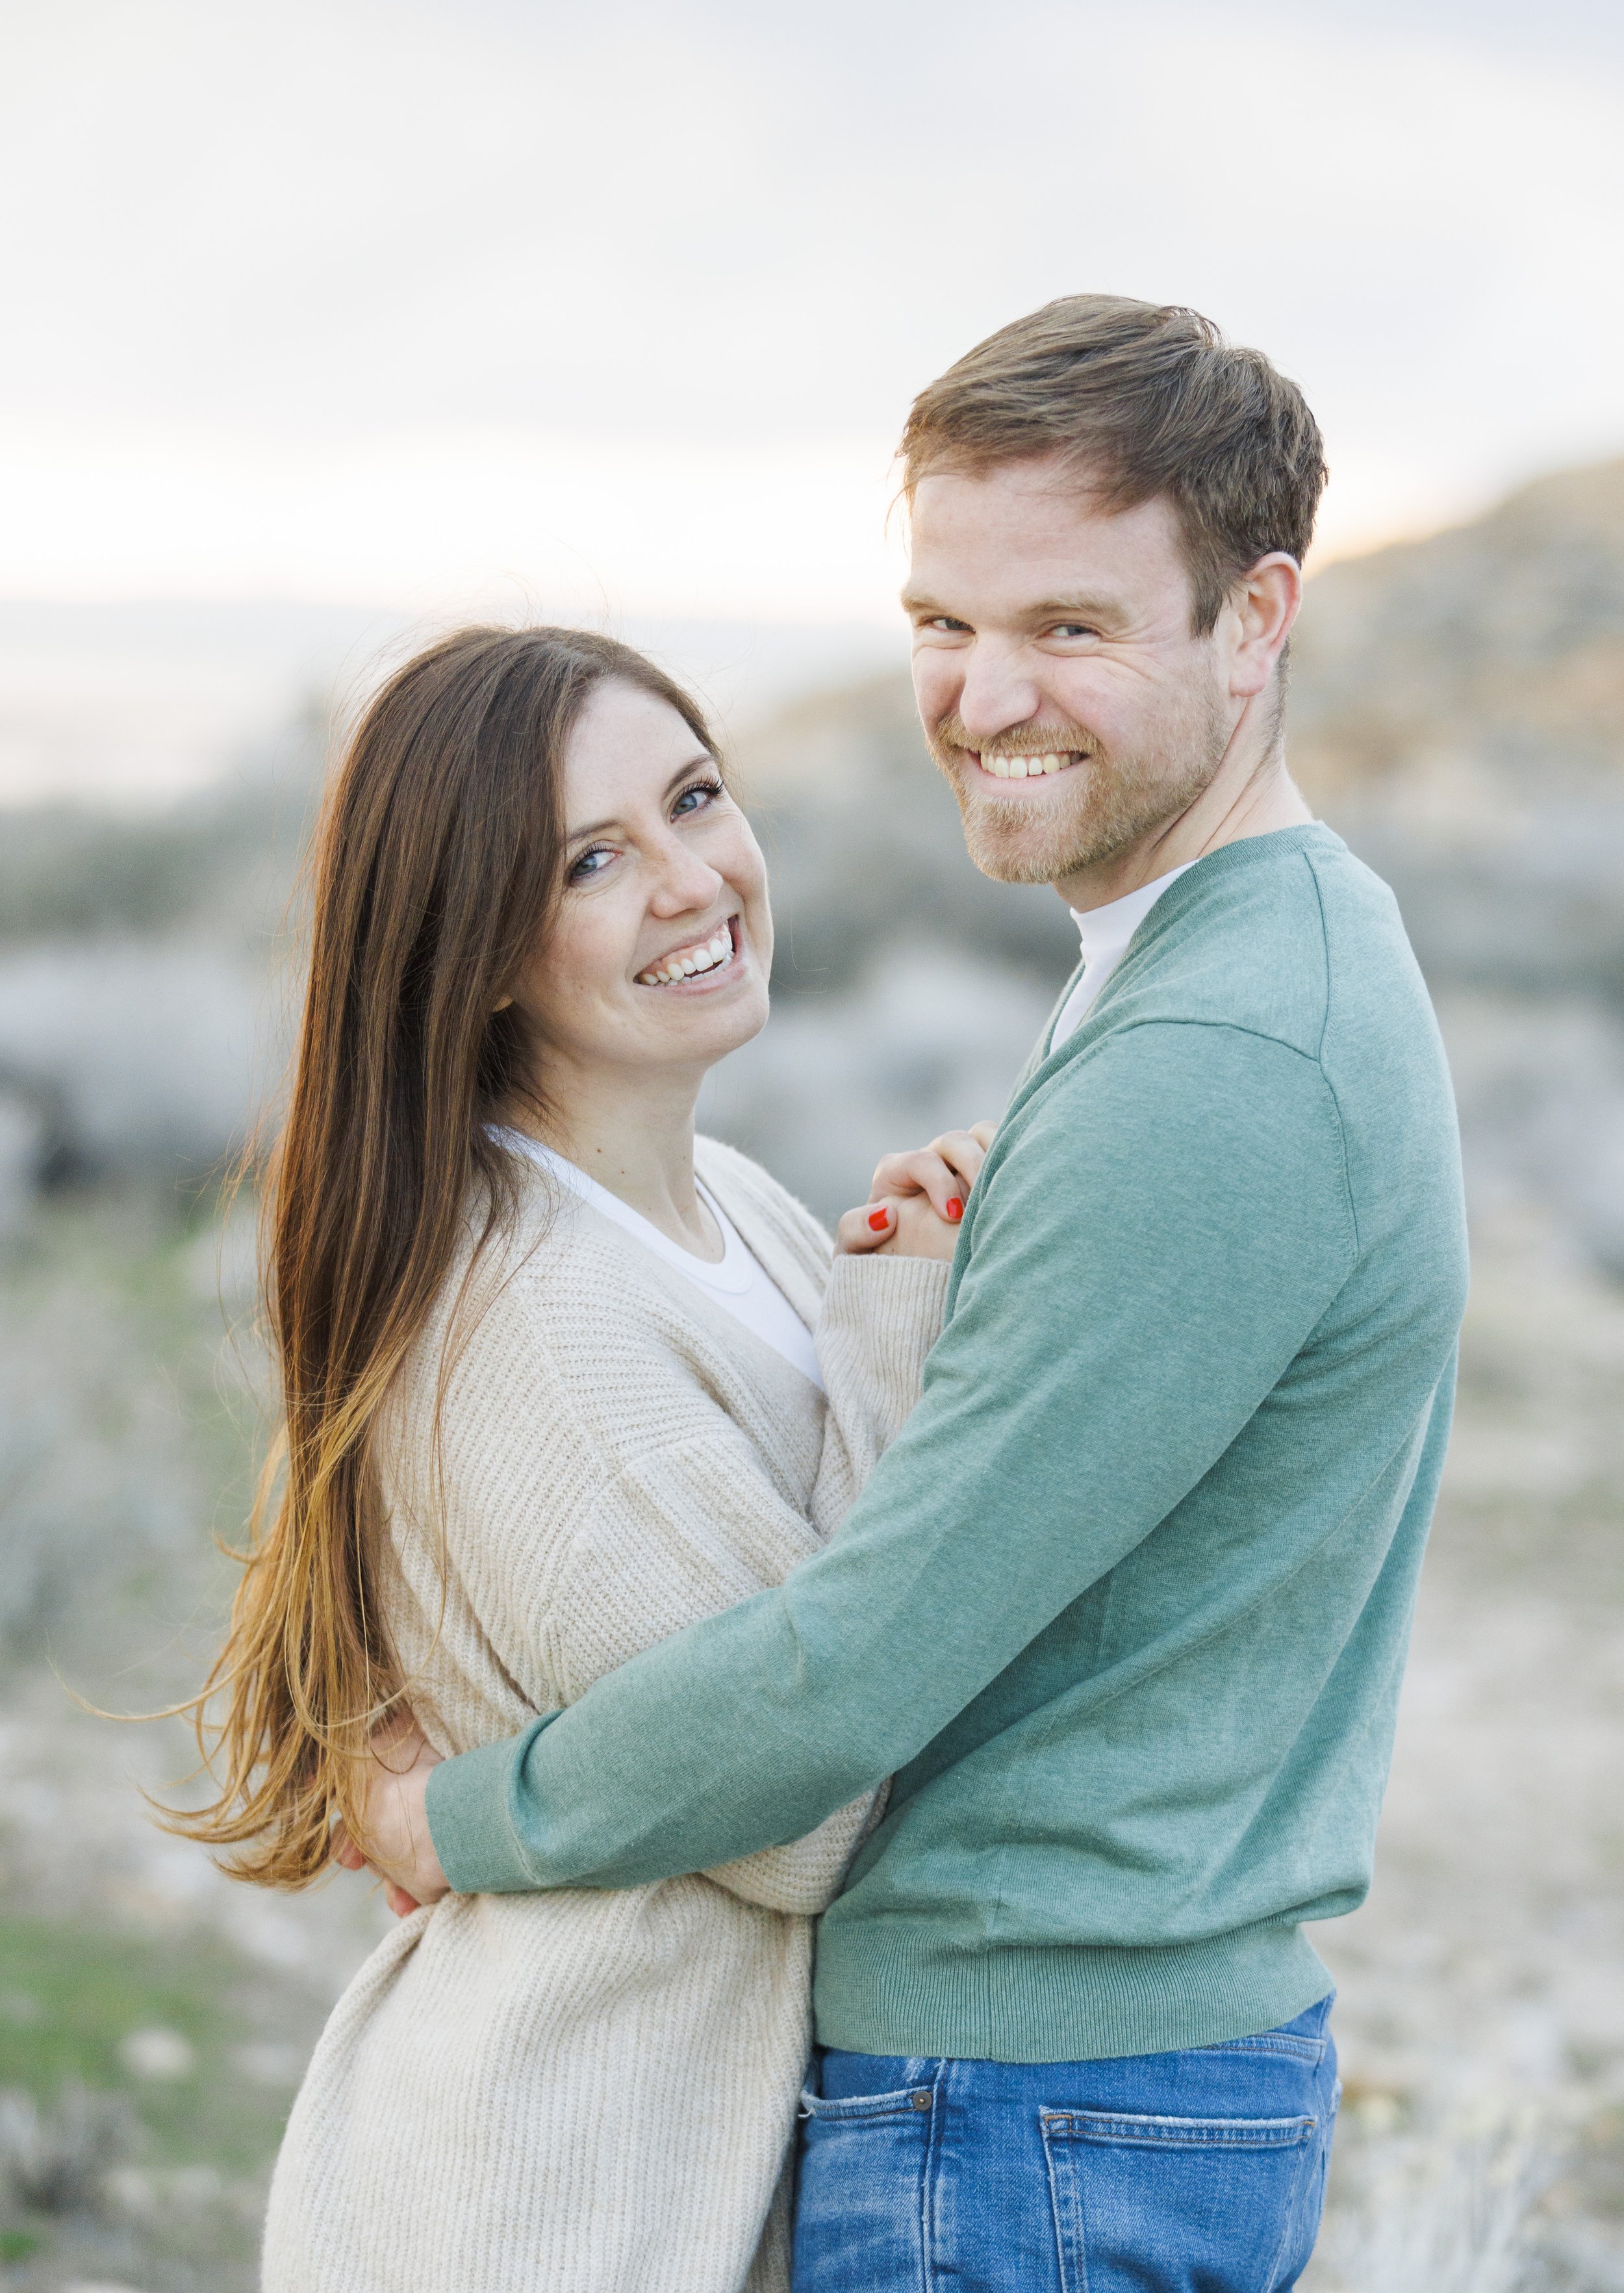  A man holds his fiance in a hug during a Spring engagement photography session with Savanna Richardson Photography. man holds woman in his arms snuggling #SavannaRichardsonPhotography #SavannaRichardsonEngagements #UtahEngagements #AntelopeIsland #S